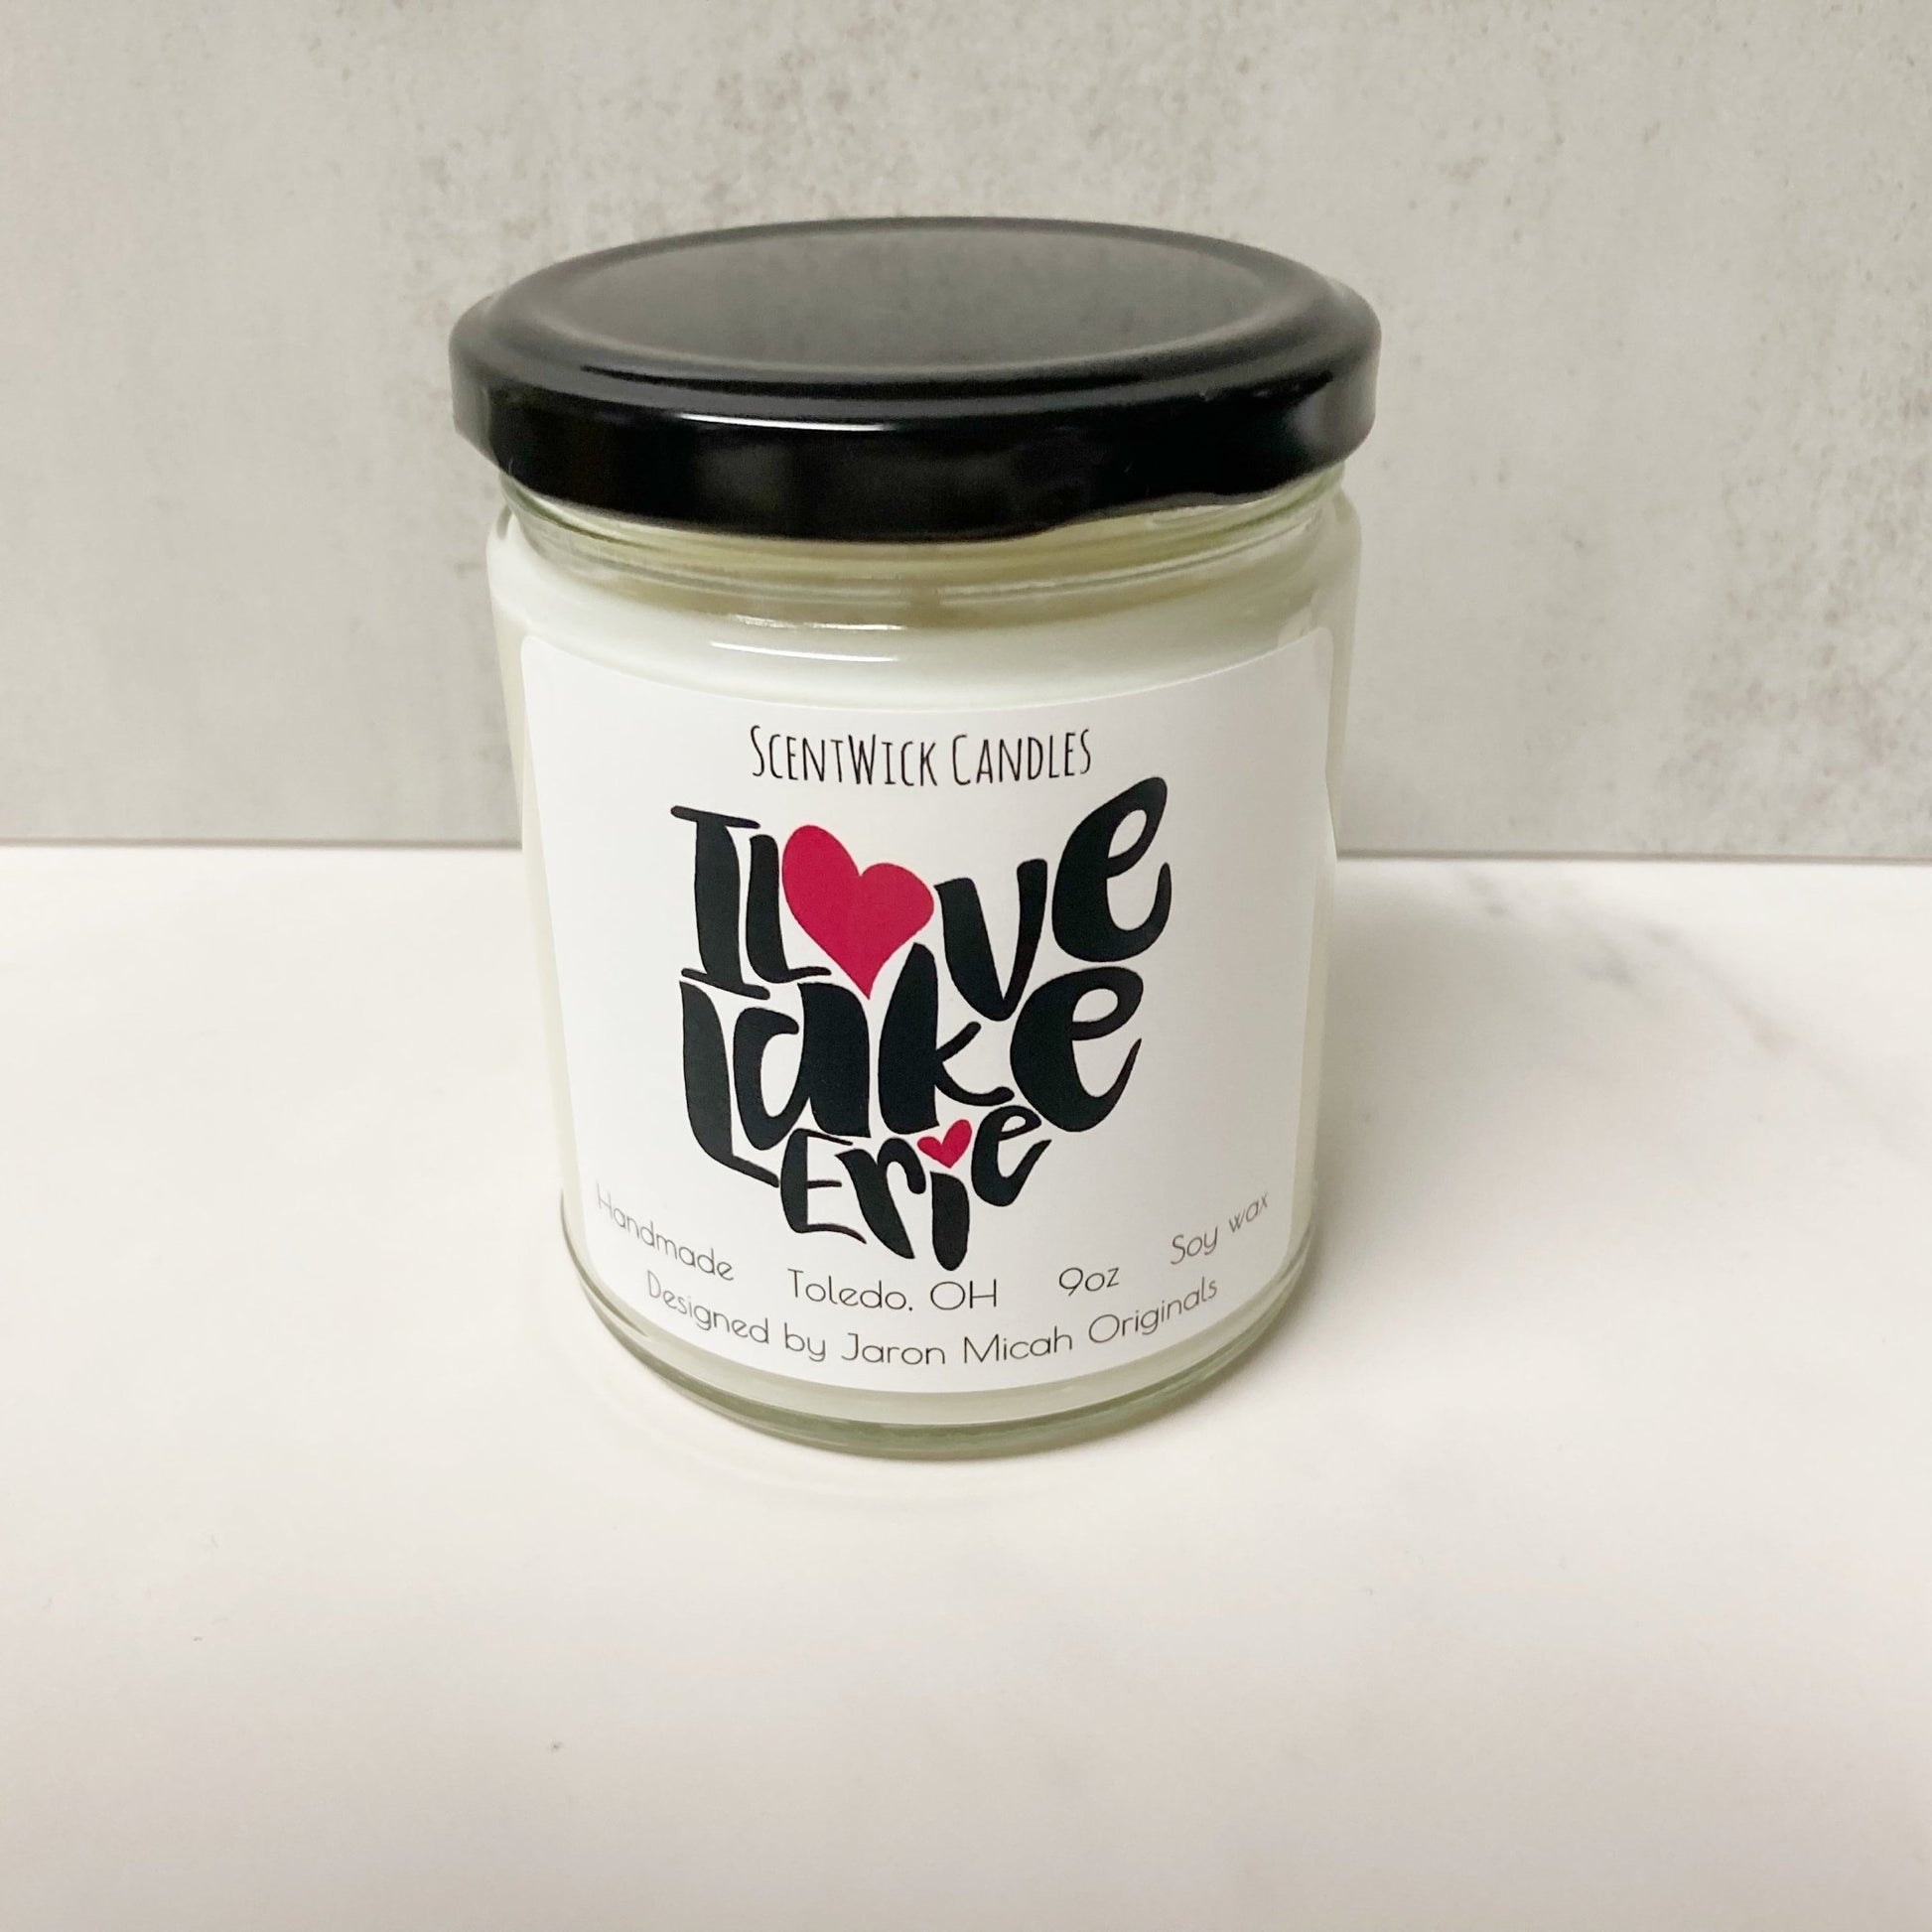 I Love Lake Erie Candle - ScentWick Candles